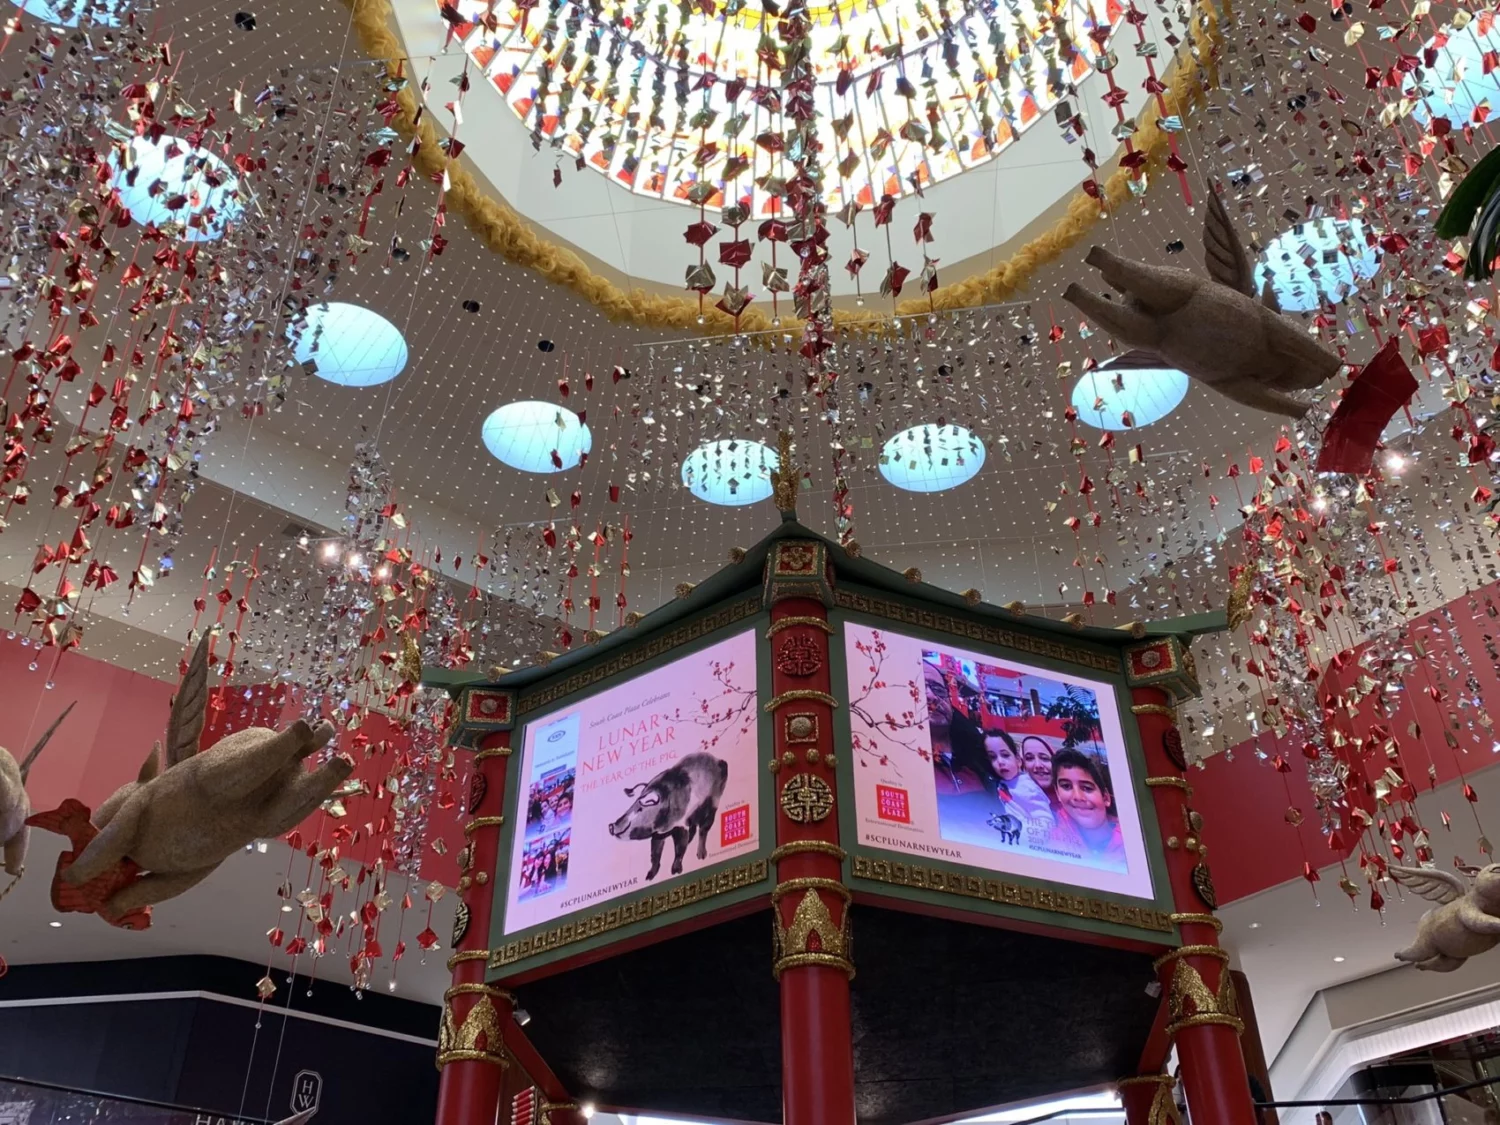 Image of LED display at Lunar New Year Event